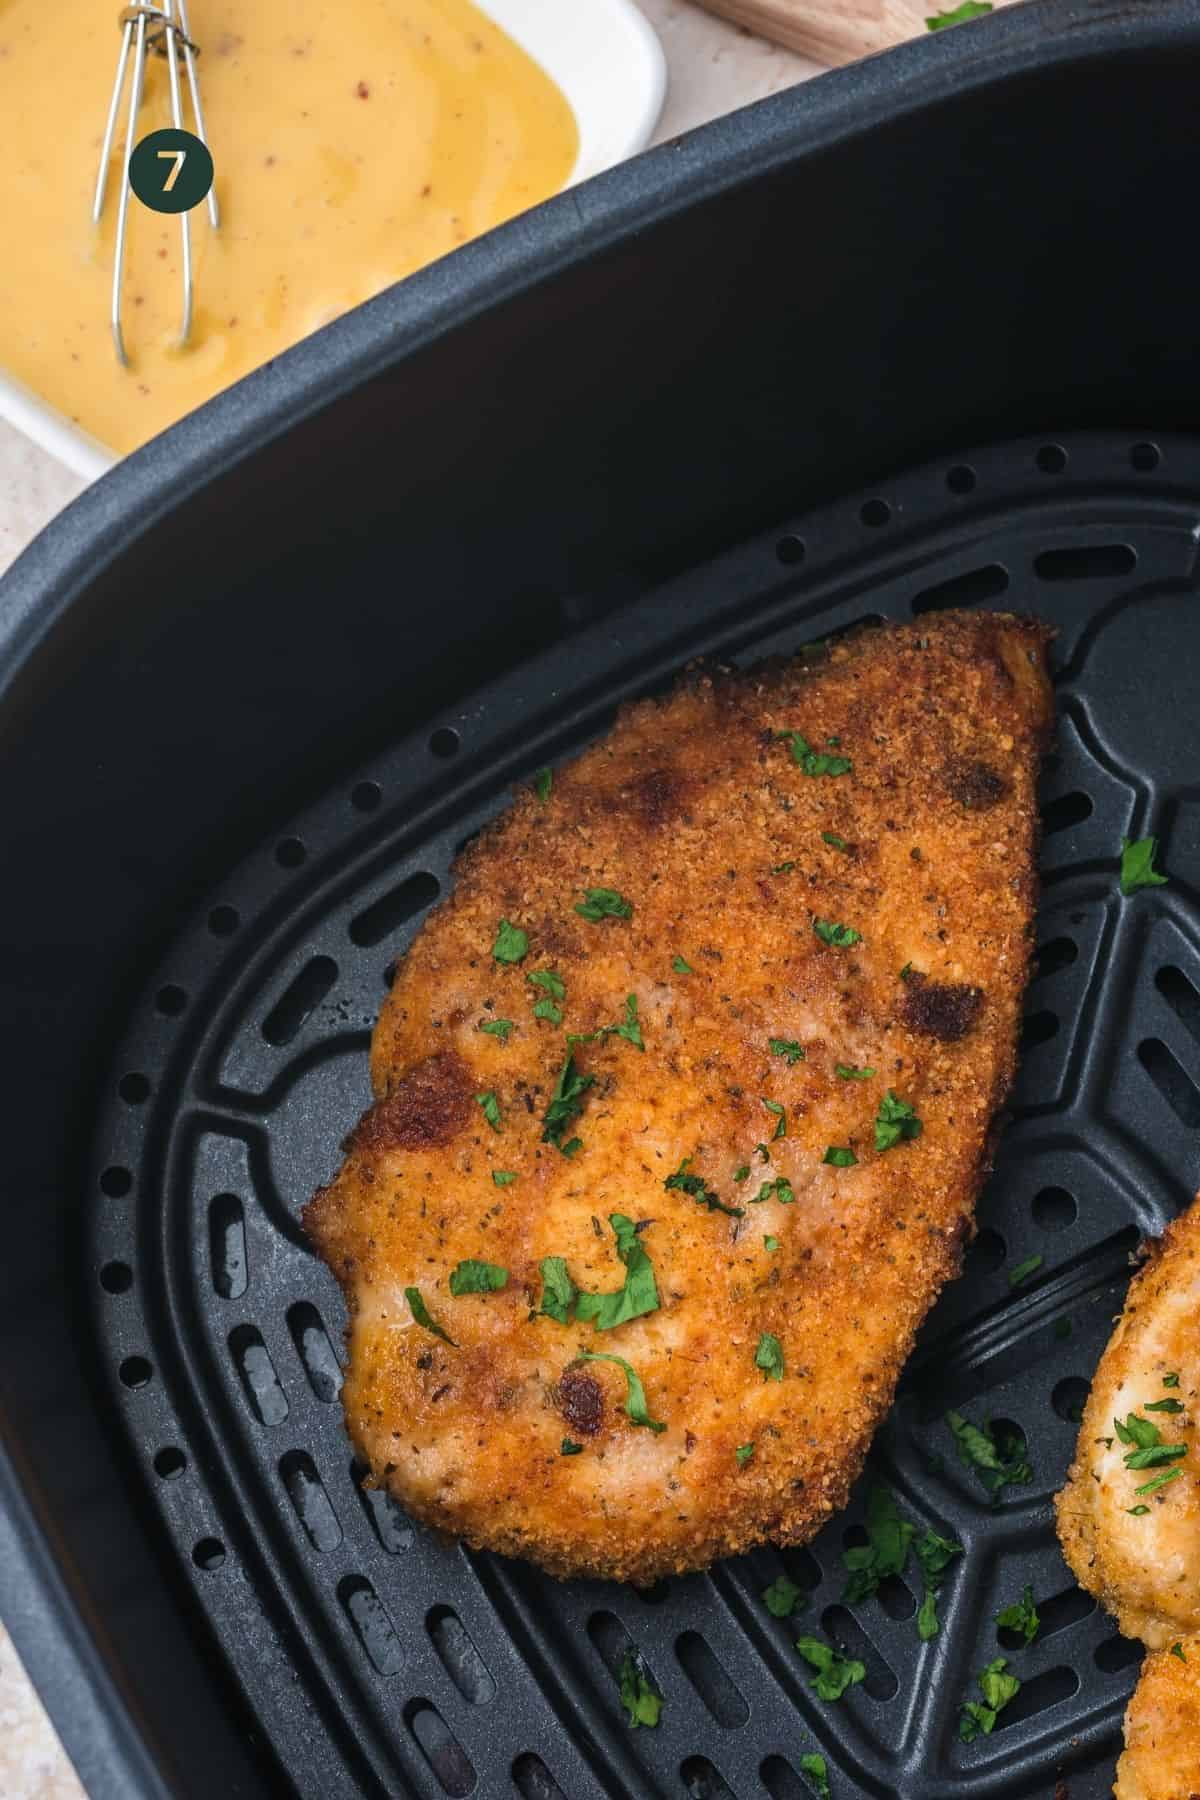 Cooked breaded chicken breast in the air fryer basket.